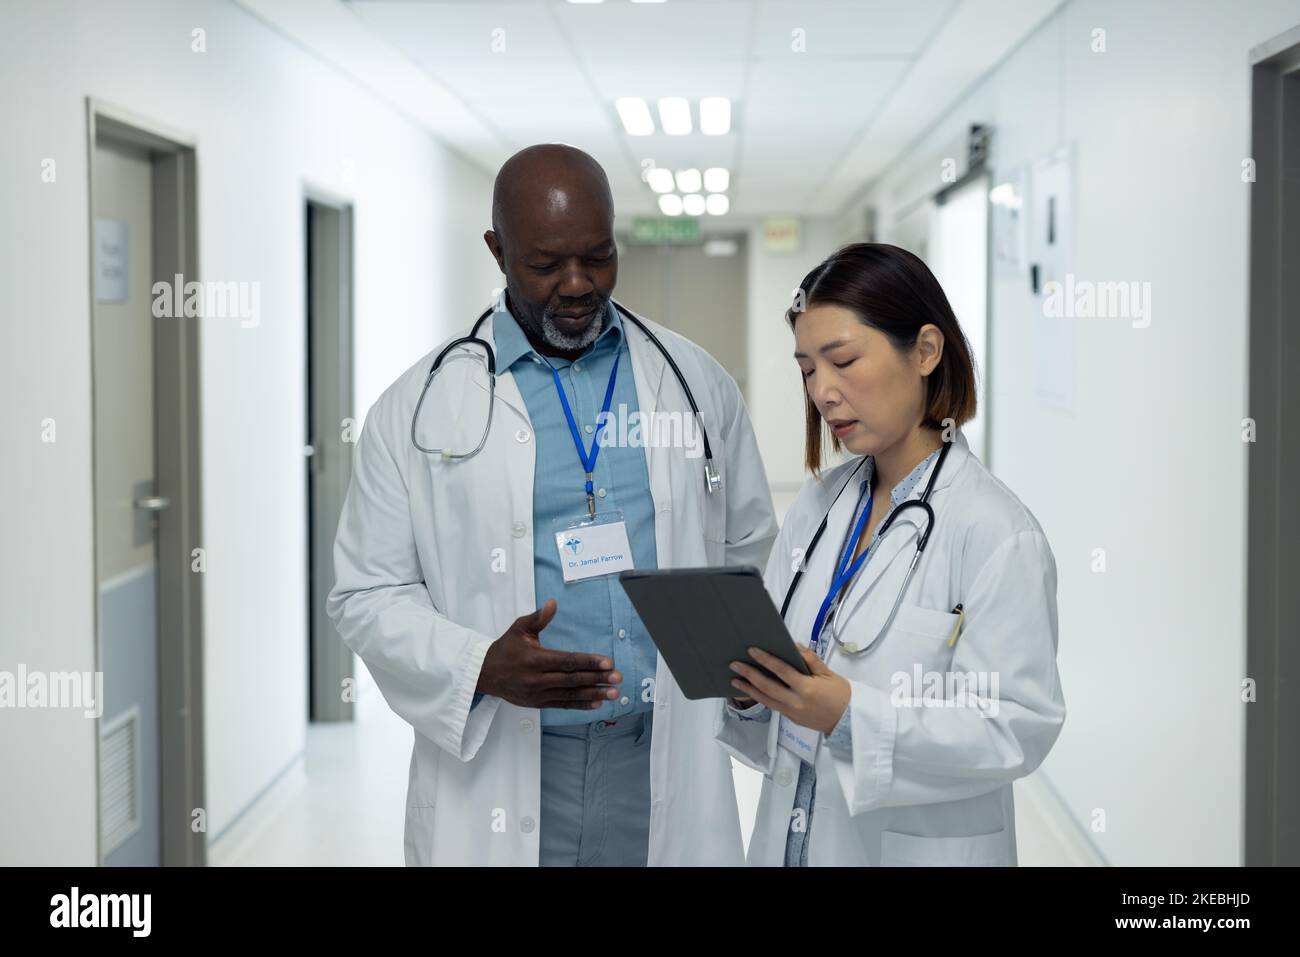 Two diverse female and female doctors looking at tablet and talking in hospital corridor. Hospital, medical and healthcare services. Stock Photo